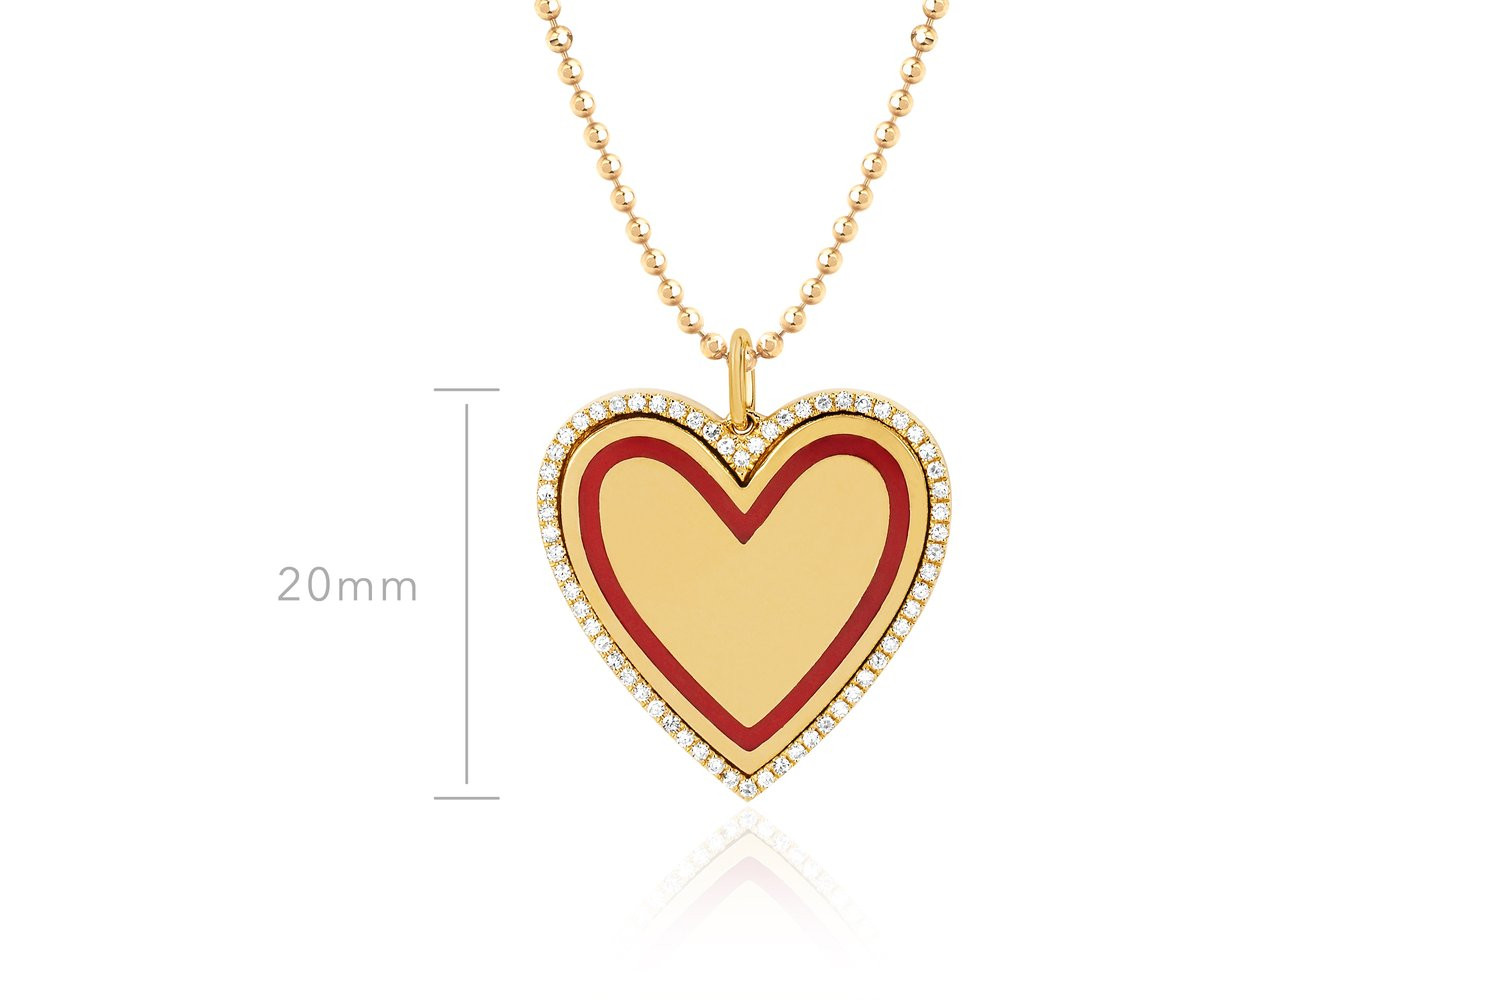 EF Collection Red Enamel Diamond Heart Necklace